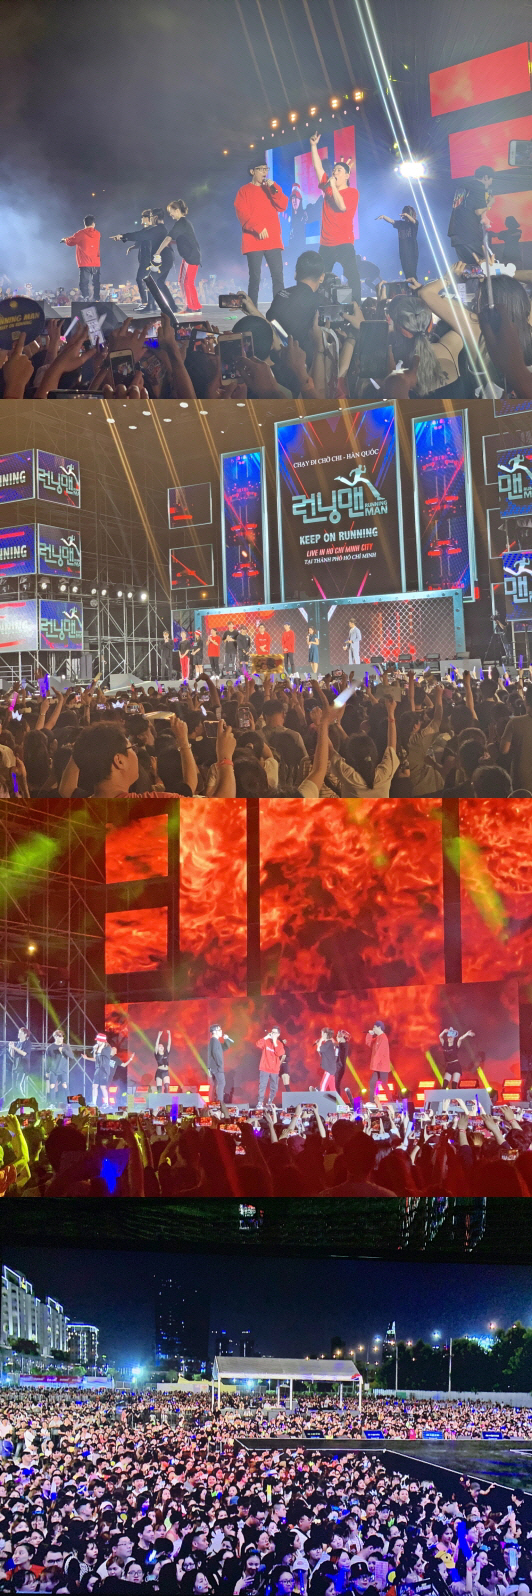 More than 10,000 Vietnam fans gathered for SBS Running Man.The fan meeting performance was held in the Ho Chi Minh outdoor performance hall with a full-seat stand, with the first 10,000 spectators in Southeast Asia gathering and the record of 9,000 tickets being sold on the first day of ticket opening.In addition, 5,000 people watched the performance at the same time as the performance began on the official YouTube live channel of Artitude Media, the official partner of SBSs Running Man fan meeting event.The performance MC appeared on the Vietnam version Running Man this year and added meaning to the role of actor and singer Nguyen Hwi, who has recently gained great popularity.The event lasted about 2 hours and 30 minutes, and the Running Man members performed a concert despite a hot day to pay back the fans support and cheers, worrying about the fans standing for a long time and watching the performance.We are preparing for the Asia fan meeting tour to celebrate the 10th anniversary of Running Man next year, and the support from Vietnam fans has been a great help, said Yoo Won-ri, producer of SBS Global Contents Biz Team.I think it served as a driving force for the fan meeting tour next year, he said.The 2019 Running Man Overseas Fan Meeting Tour will end Ho Chi Minh after Hong Kong and Jakarta.On the other hand, Running Man is expected to continue its global popularity as Running Man will prepare for the launch of Vietnam version Running Man Season 2 based on its popularity in Vietnam.